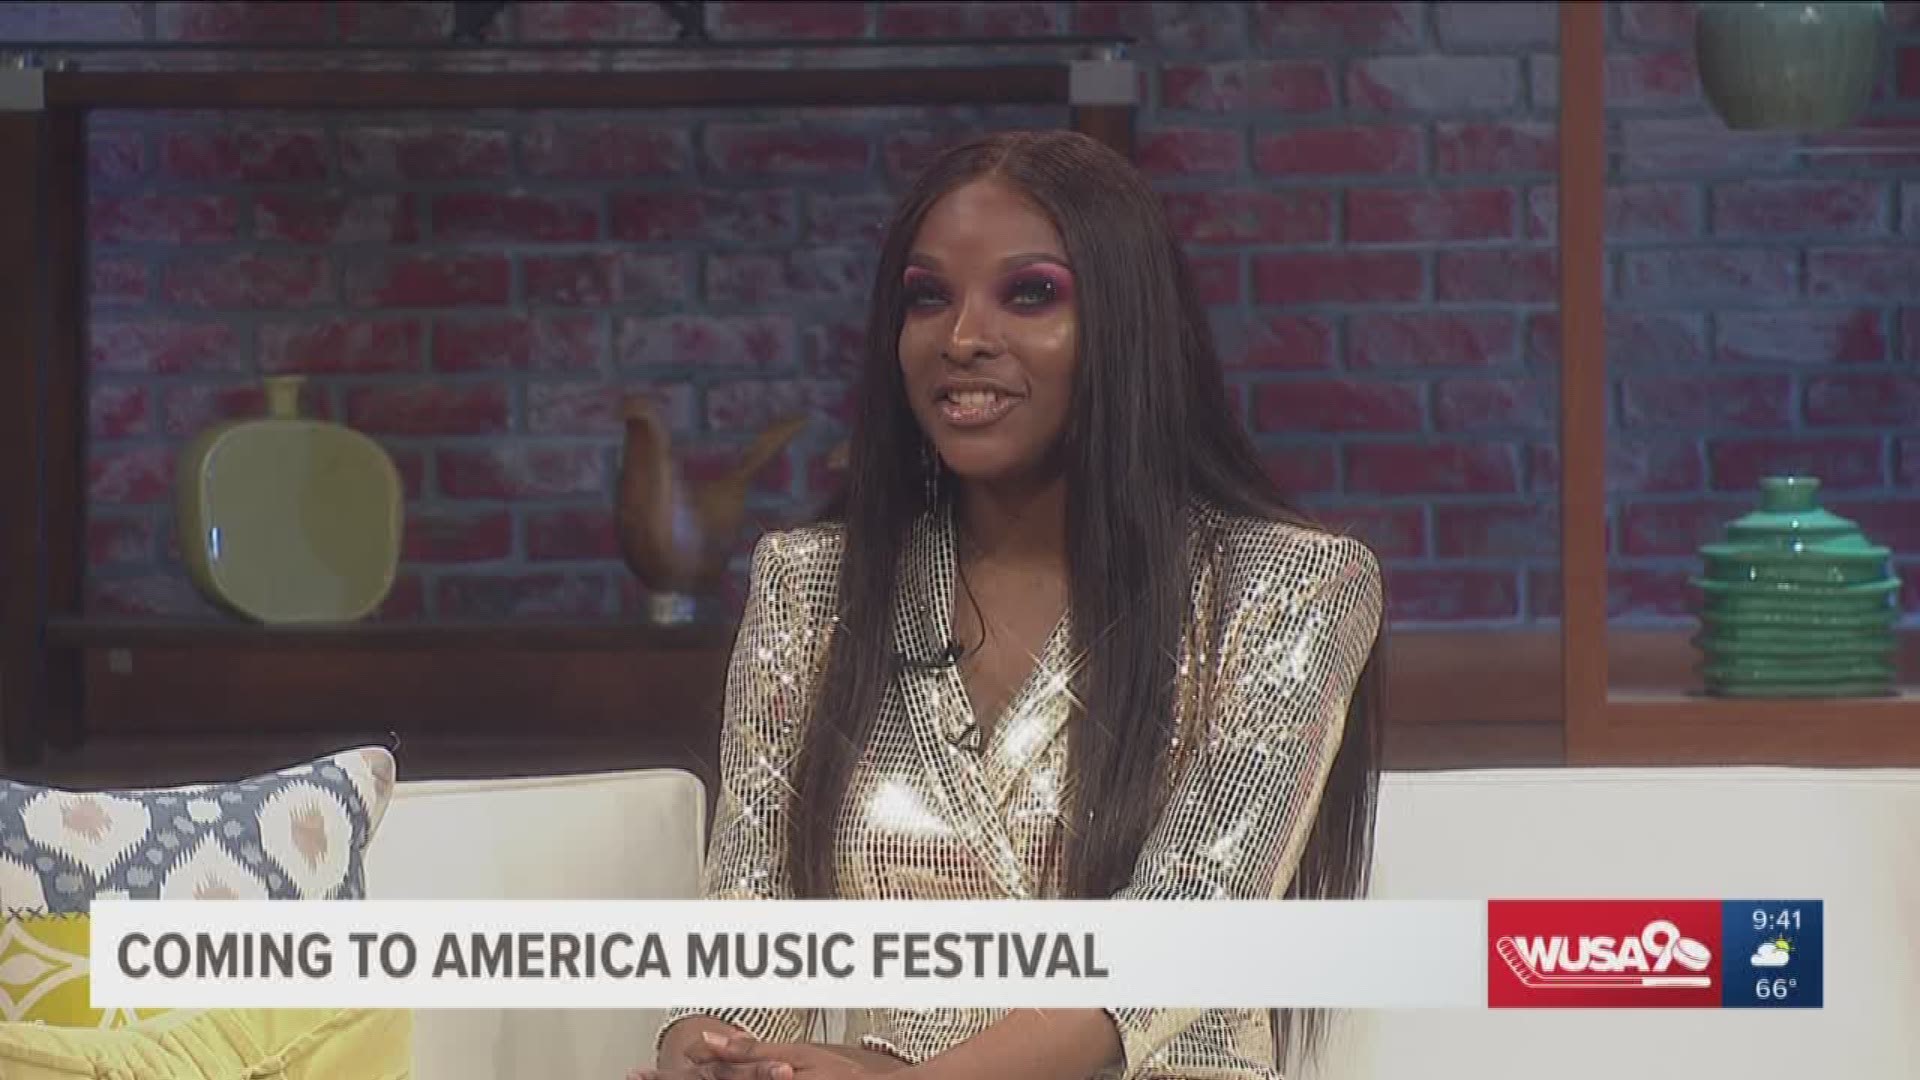 There's a new music festival coming to town this Saturday, April 27. It will feature top artists from Africa, including Davido, singer of the hit song, "Fall." Festival founder Eshoon Nashun shares more on Great Day.